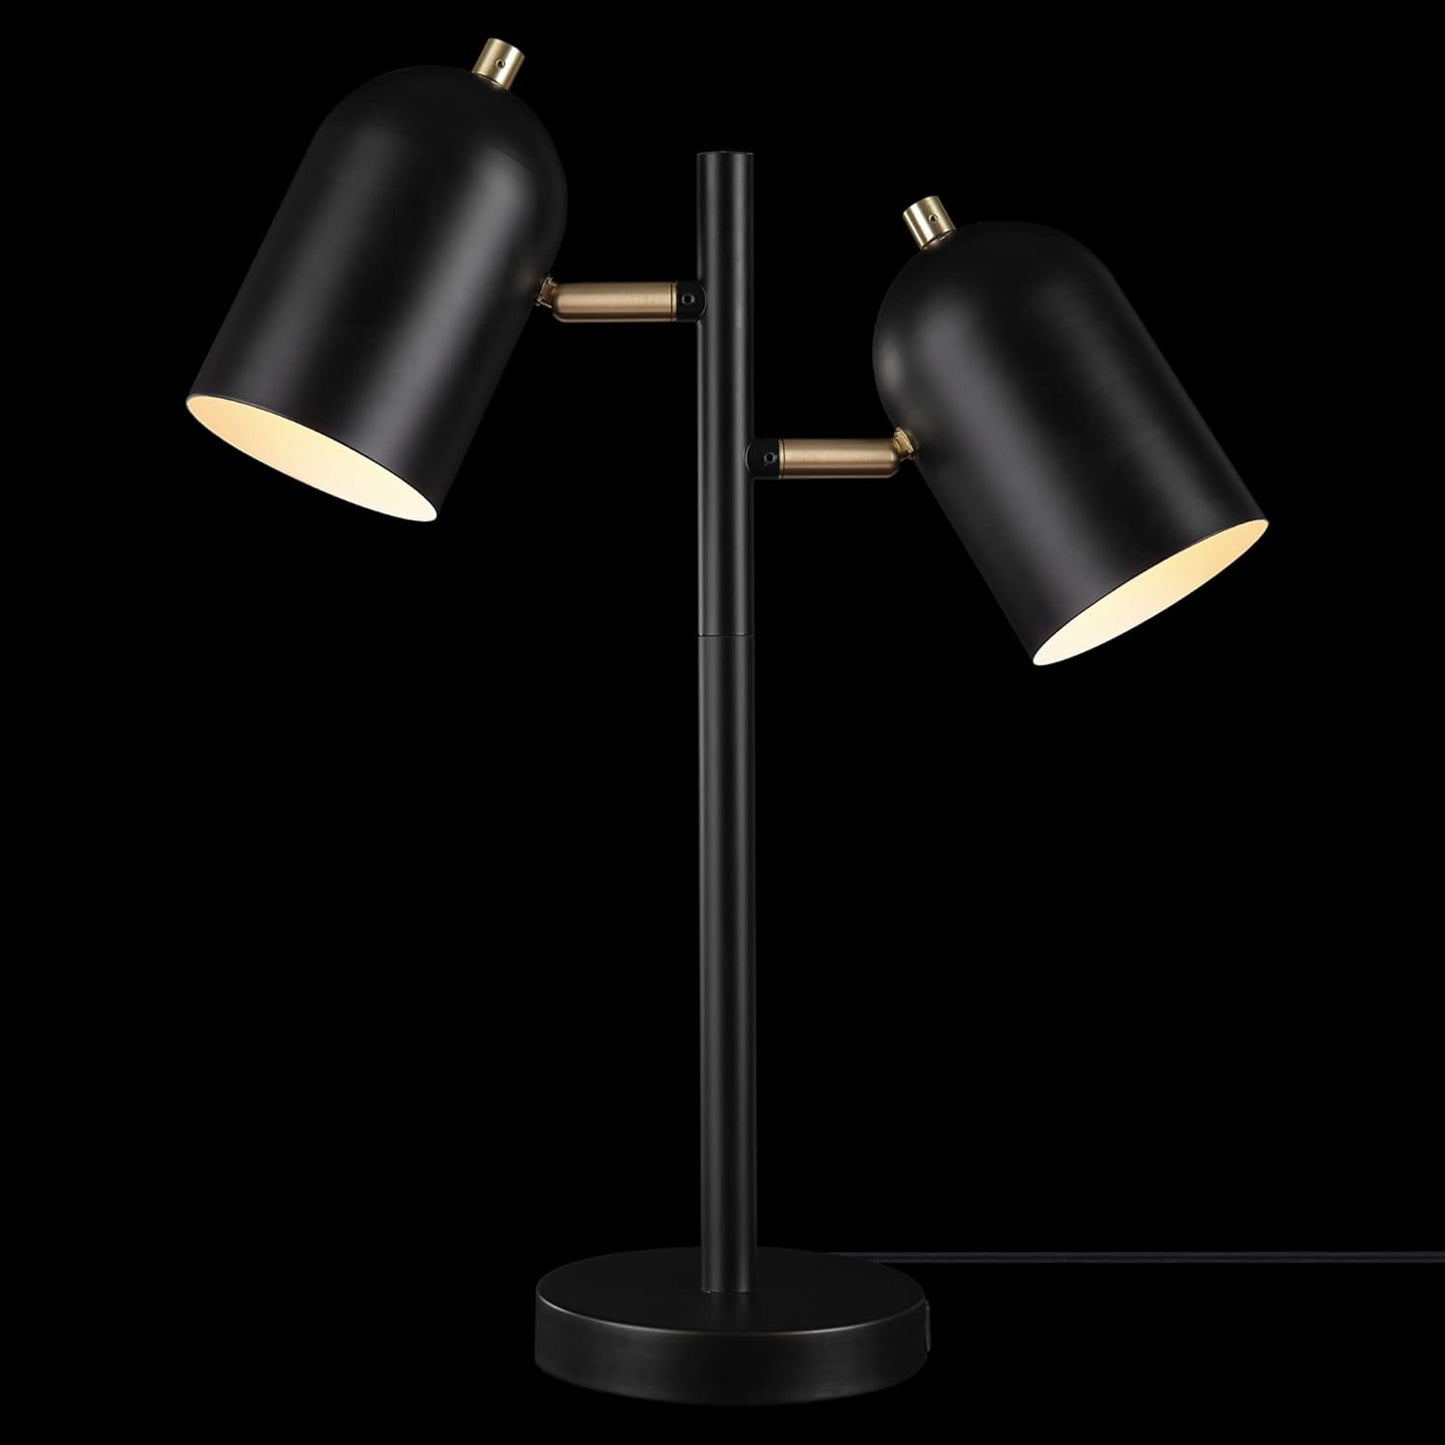 52994 19" 2-Light Desk Lamp, Matte Black, Matte Brass Accents, 2.1A USB Port, On/Off Rotary Switch on Each Shade